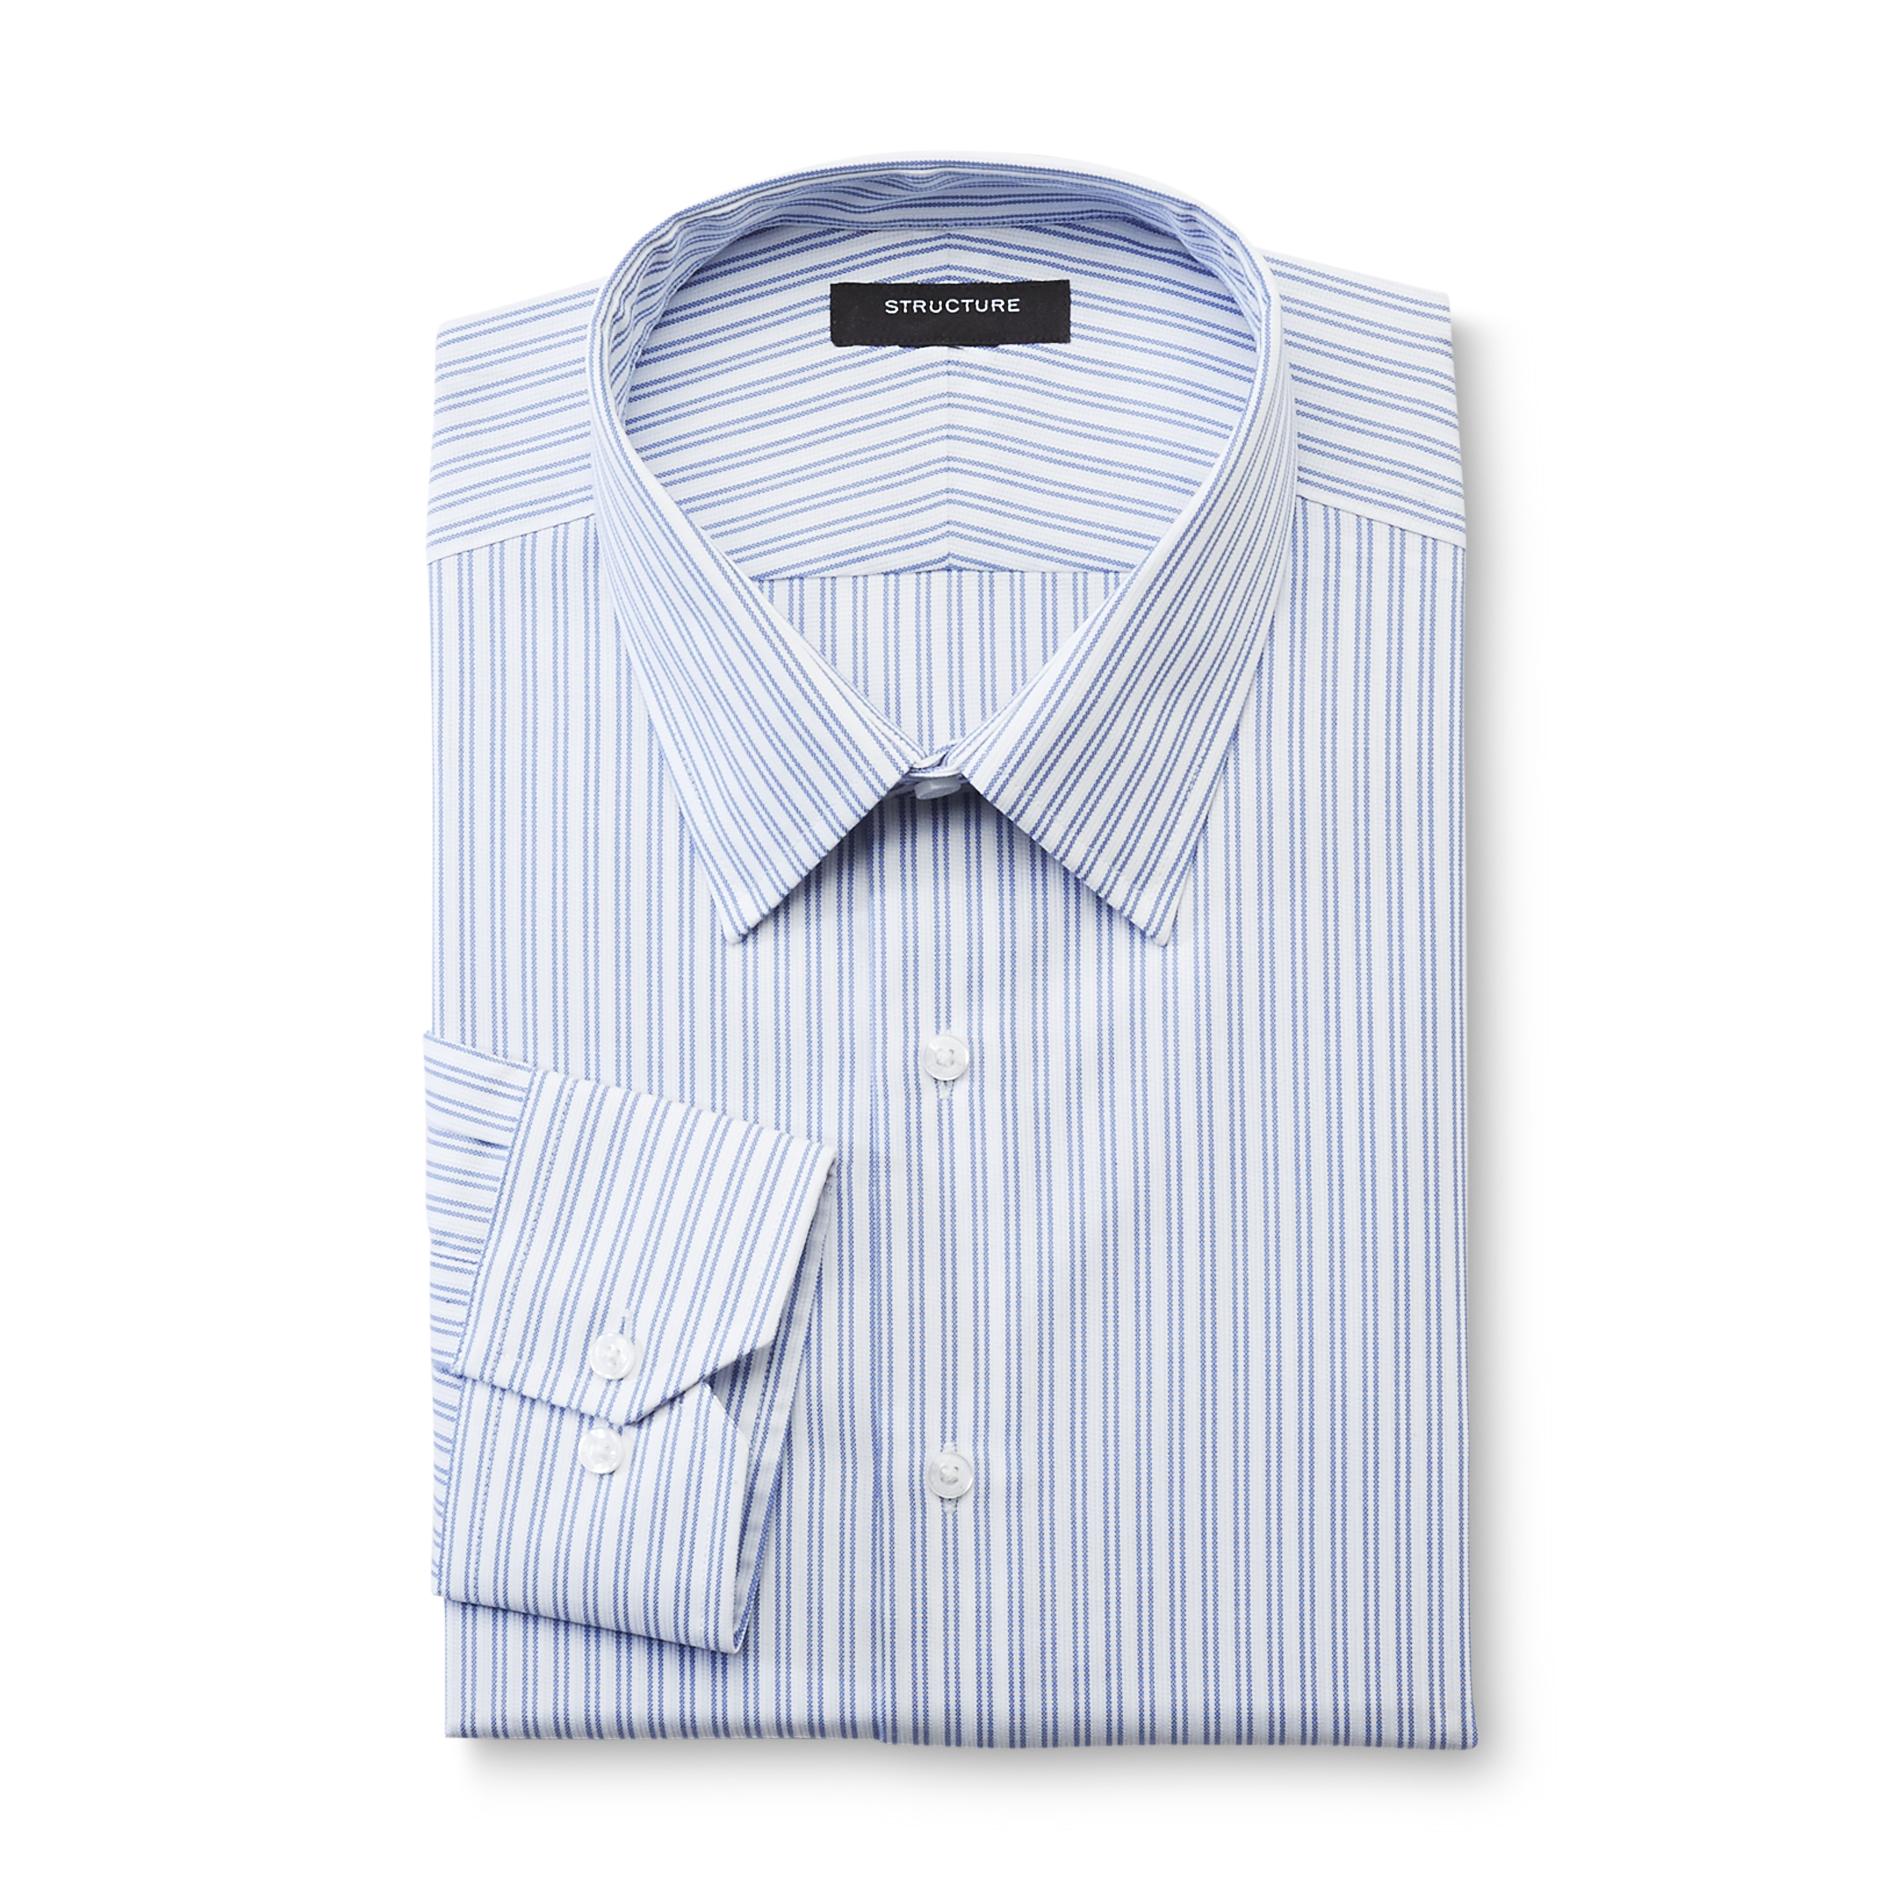 Structure Men's Fitted Wrinkle Free Dress Shirt - Textured Stripe